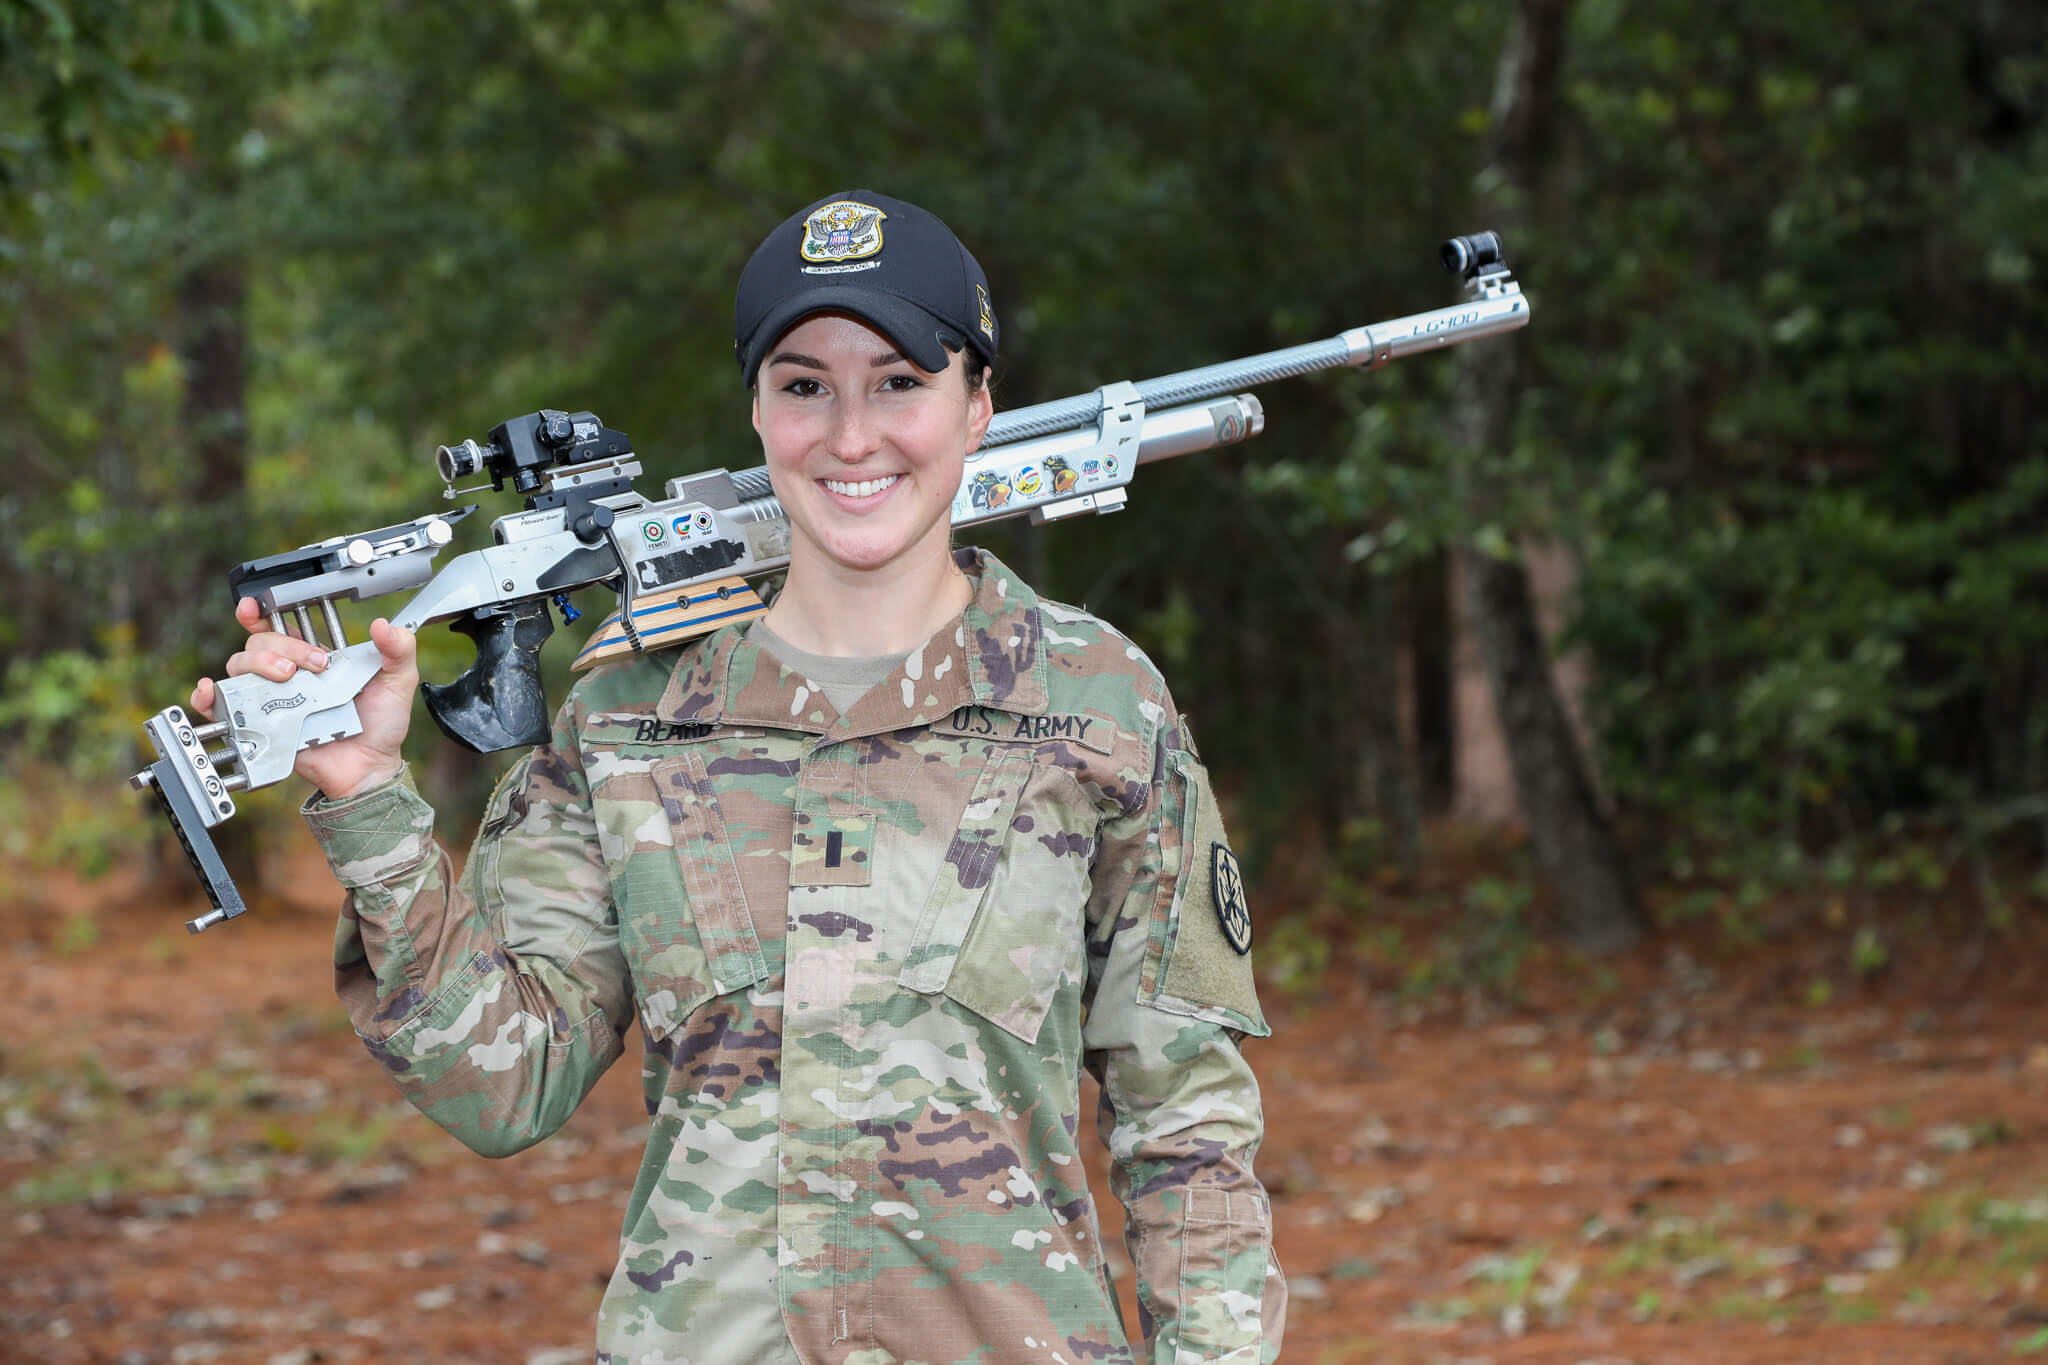 Three U.S. Army Reserve soldiers, who train at the U.S. Army Marksmanship Unit on Fort Benning. Georgia, are currently seeking a spot on Team USA for the 2020 Olympics in Tokyo, Japan. 1st Lt. Amber English and 1st Lt. Sarah Beard (pictured) are assigned to the U.S. Army World Class Athlete Program and attached to the USAMU. Staff Sgt. Sandra Uptagrafft is a Soldier with the 98th Training Division and utilizes the USAMU ranges for training.